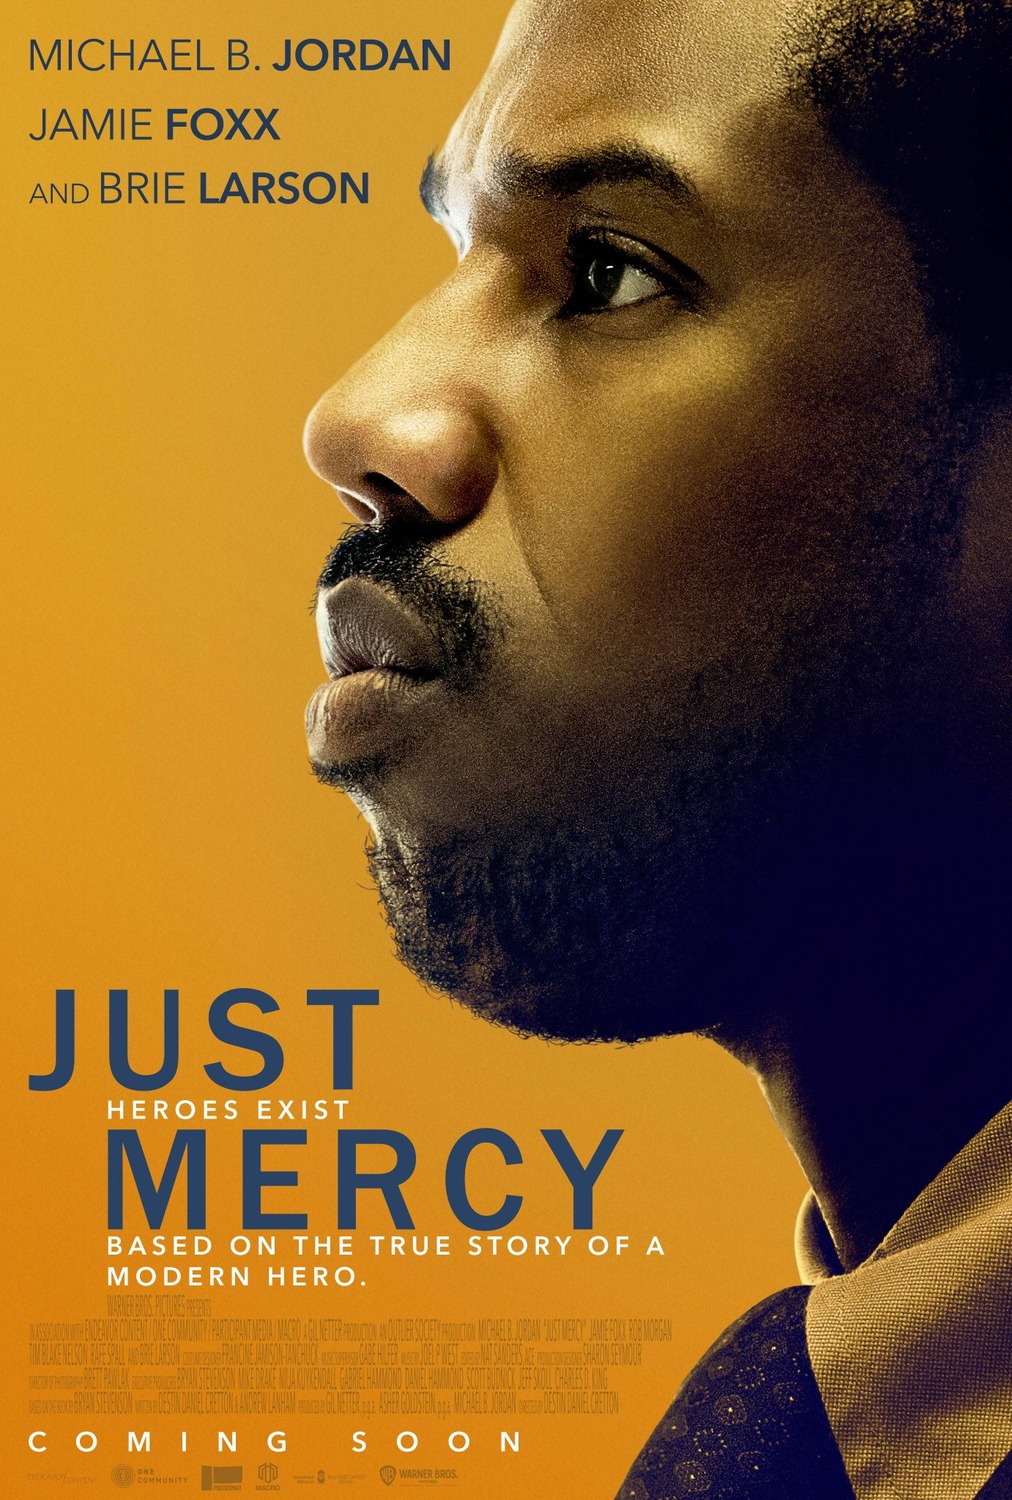 “Just Mercy” Seattle Screening a Sold-Out Success